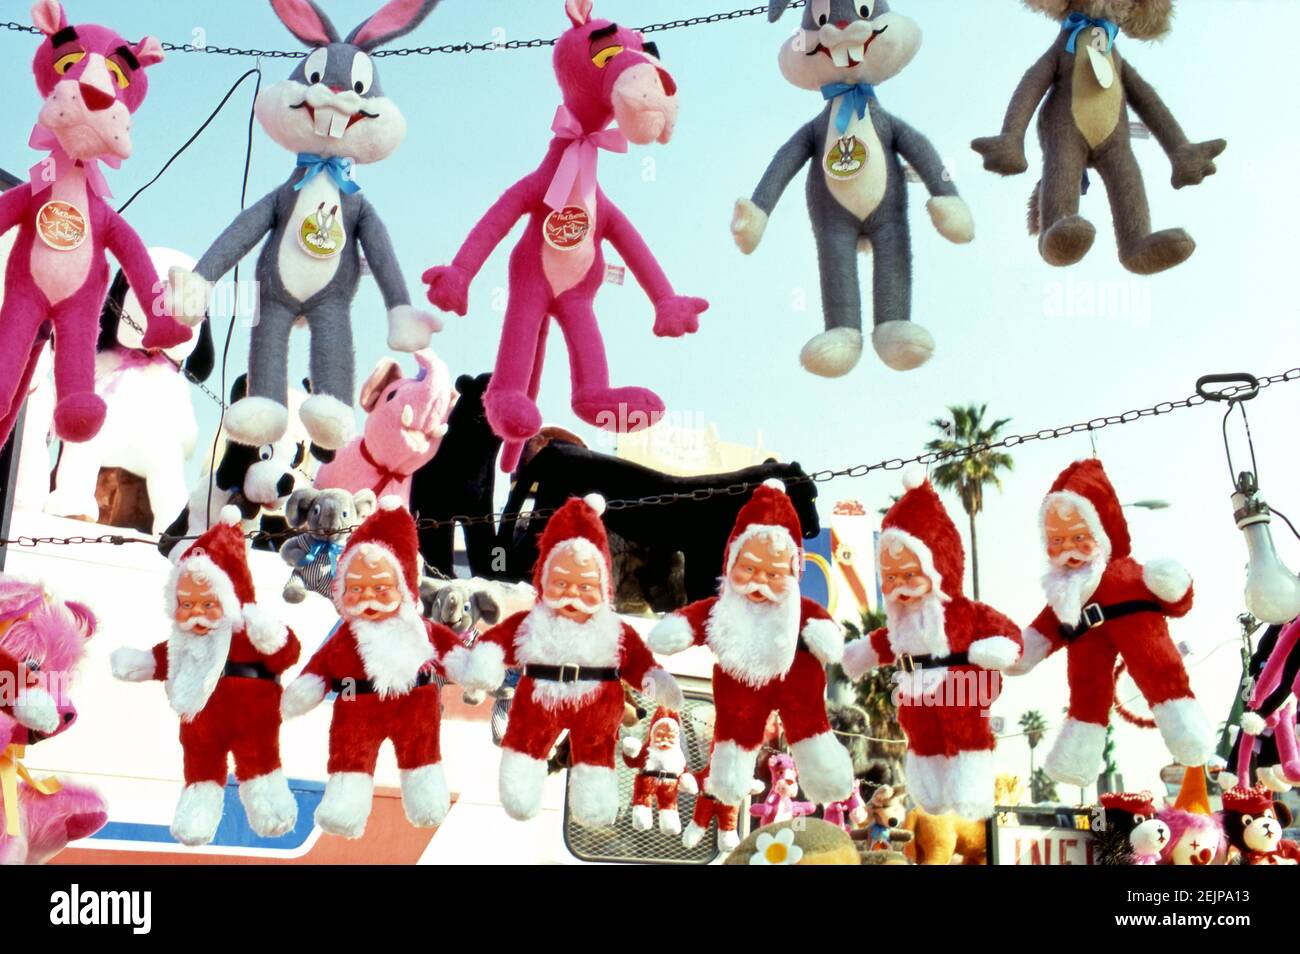 Stuffed Santa and cartoon character toys on sale in a gas station in Hollywood, CA circa 1970s Stock Photo